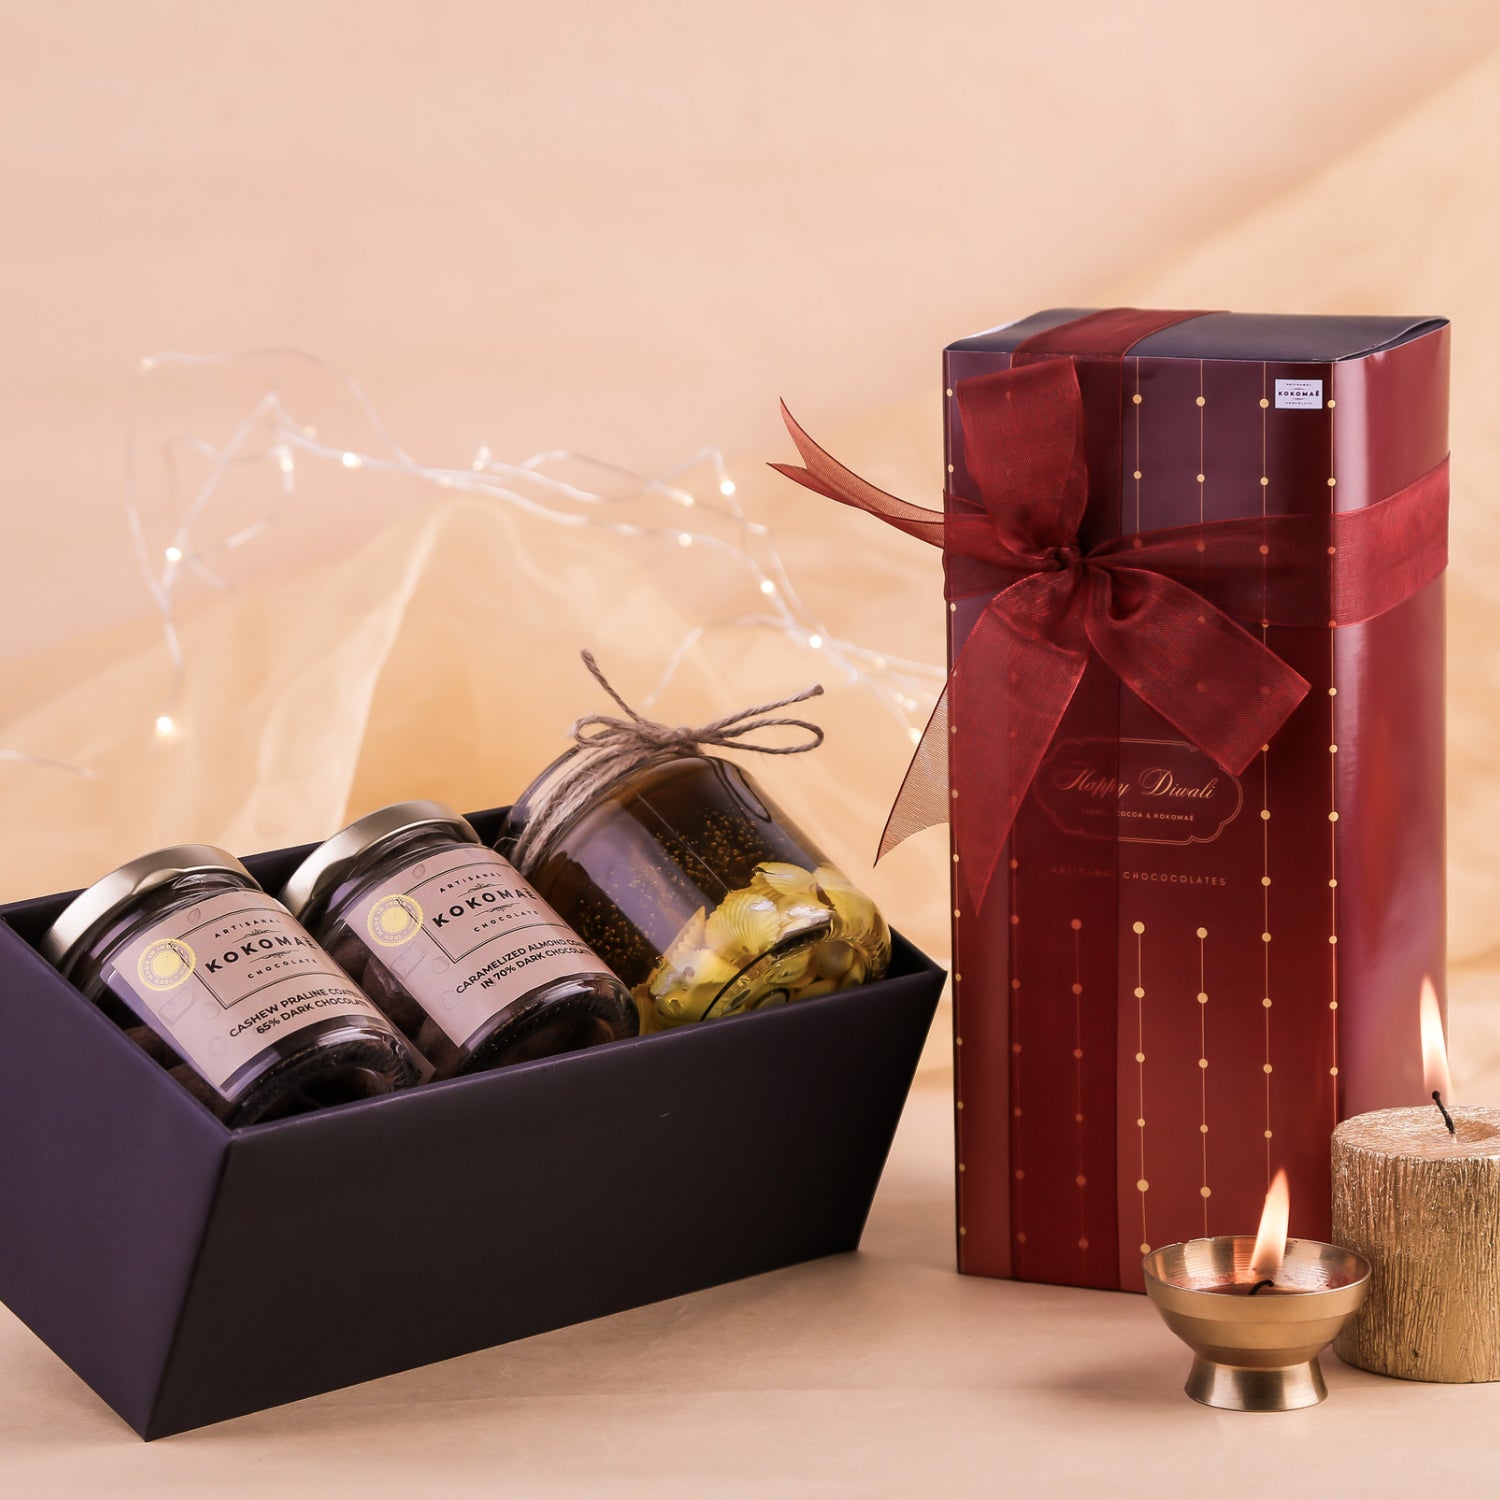 Kokomaē Premium Gift Basket for Diwali with 2 Jars of Chocolate Coated Nuts & a Candle